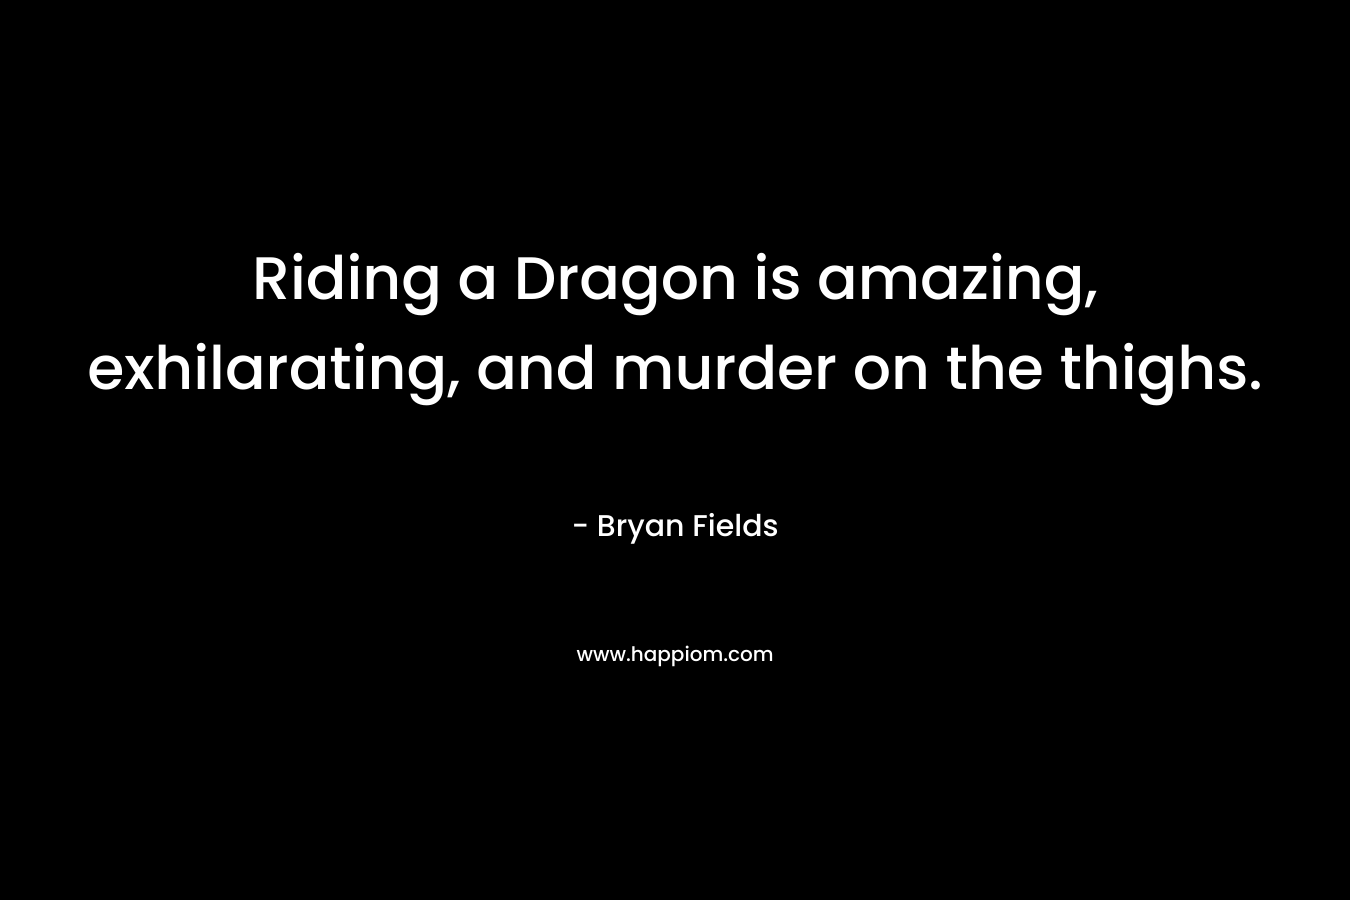 Riding a Dragon is amazing, exhilarating, and murder on the thighs.